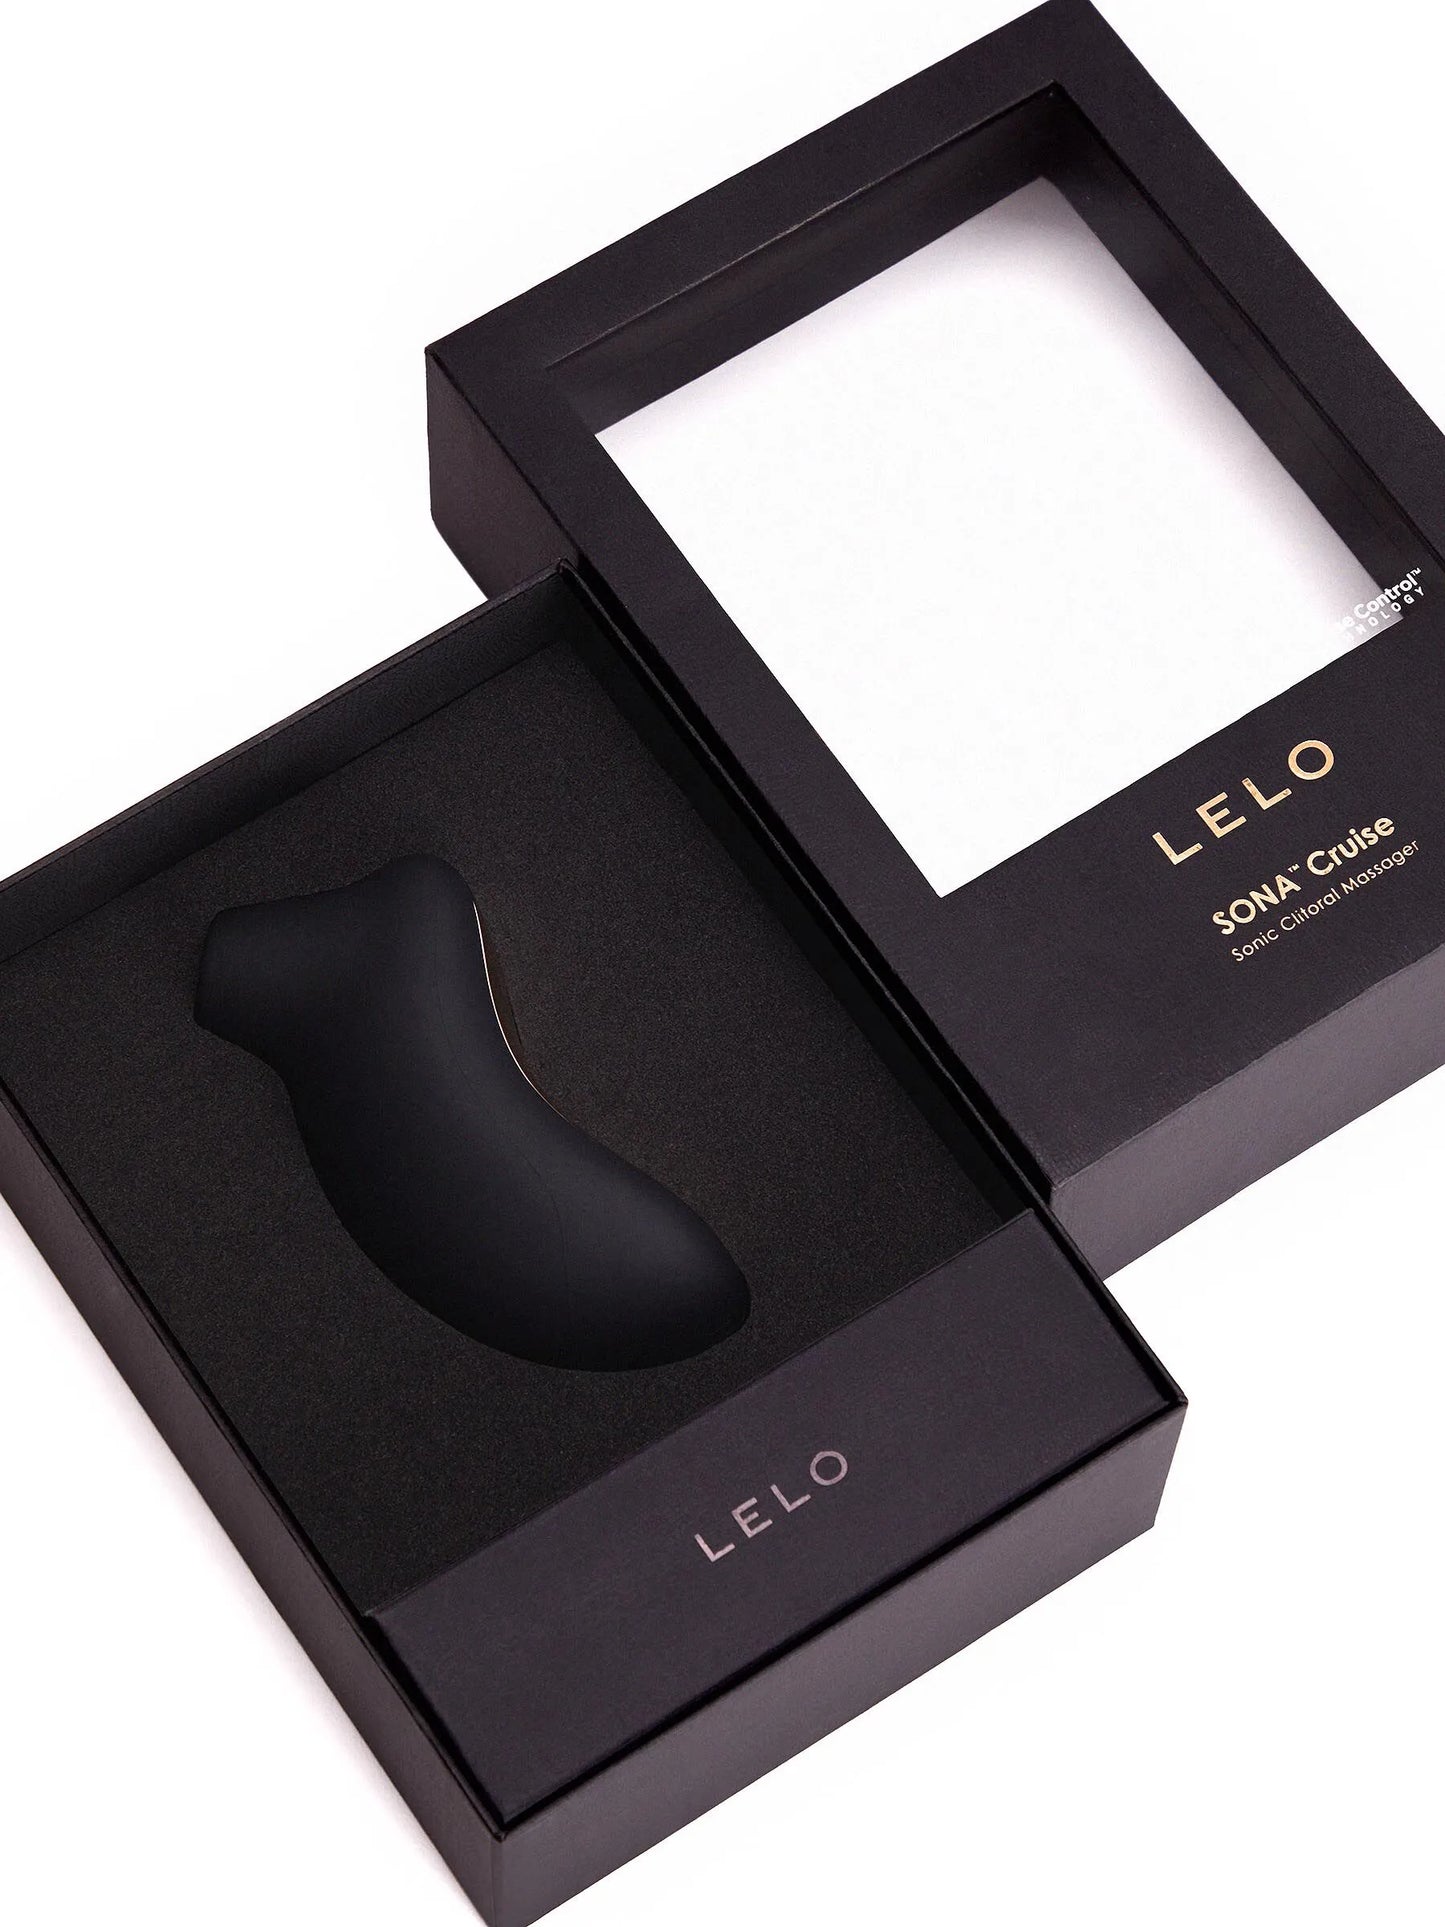 Lelo Sona Cruise Clitoral Vibrator From Ann Summers, Image 05